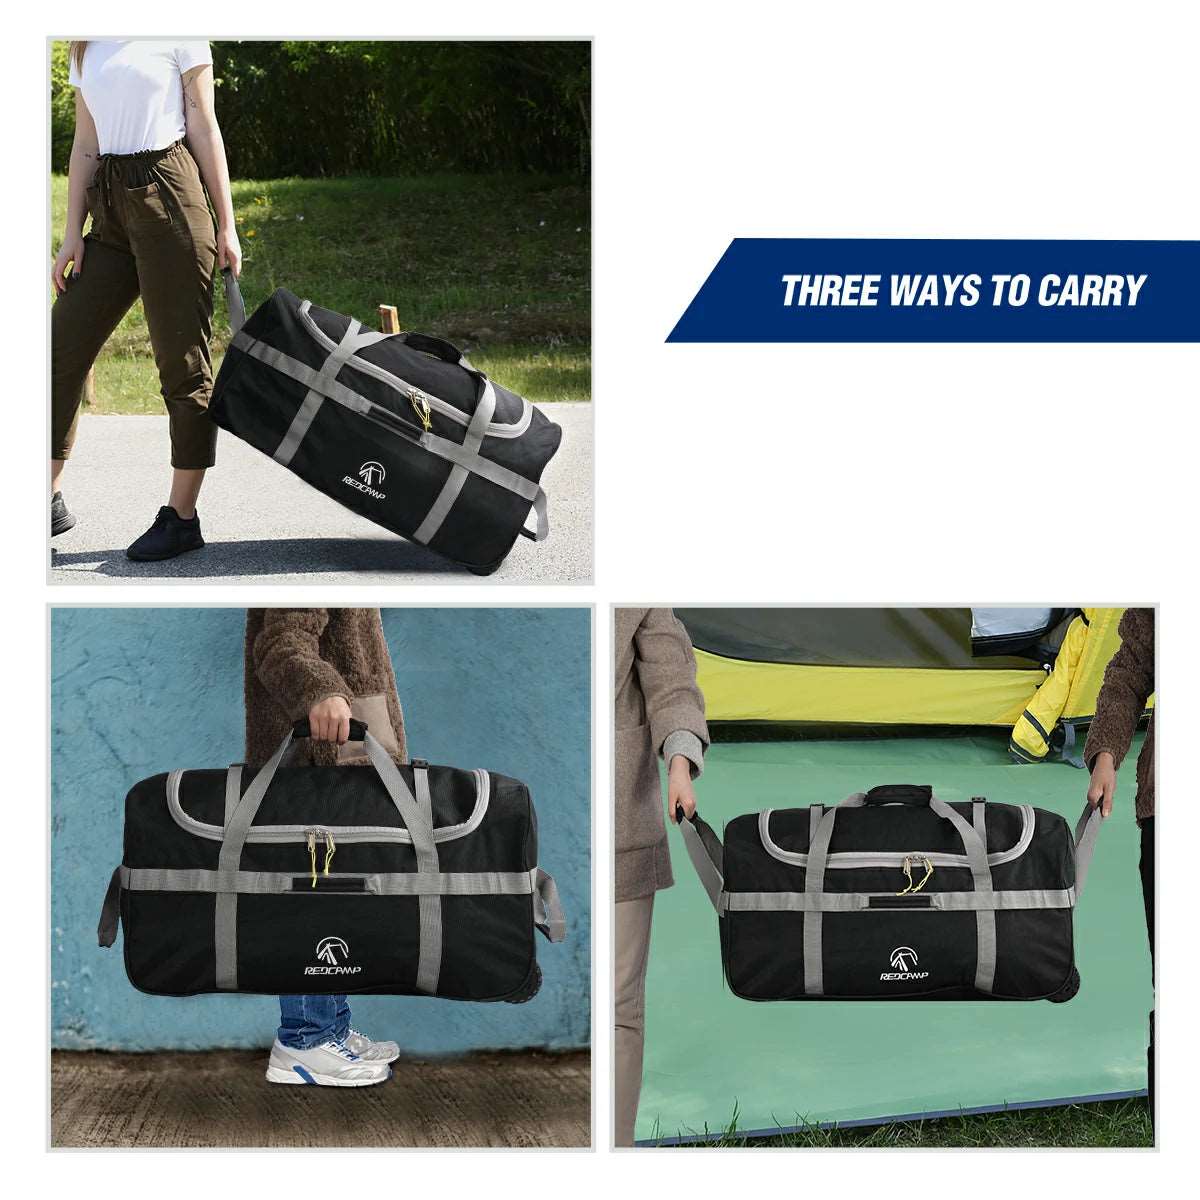 Foldable Duffle Bag with Wheels for travel 85/120L